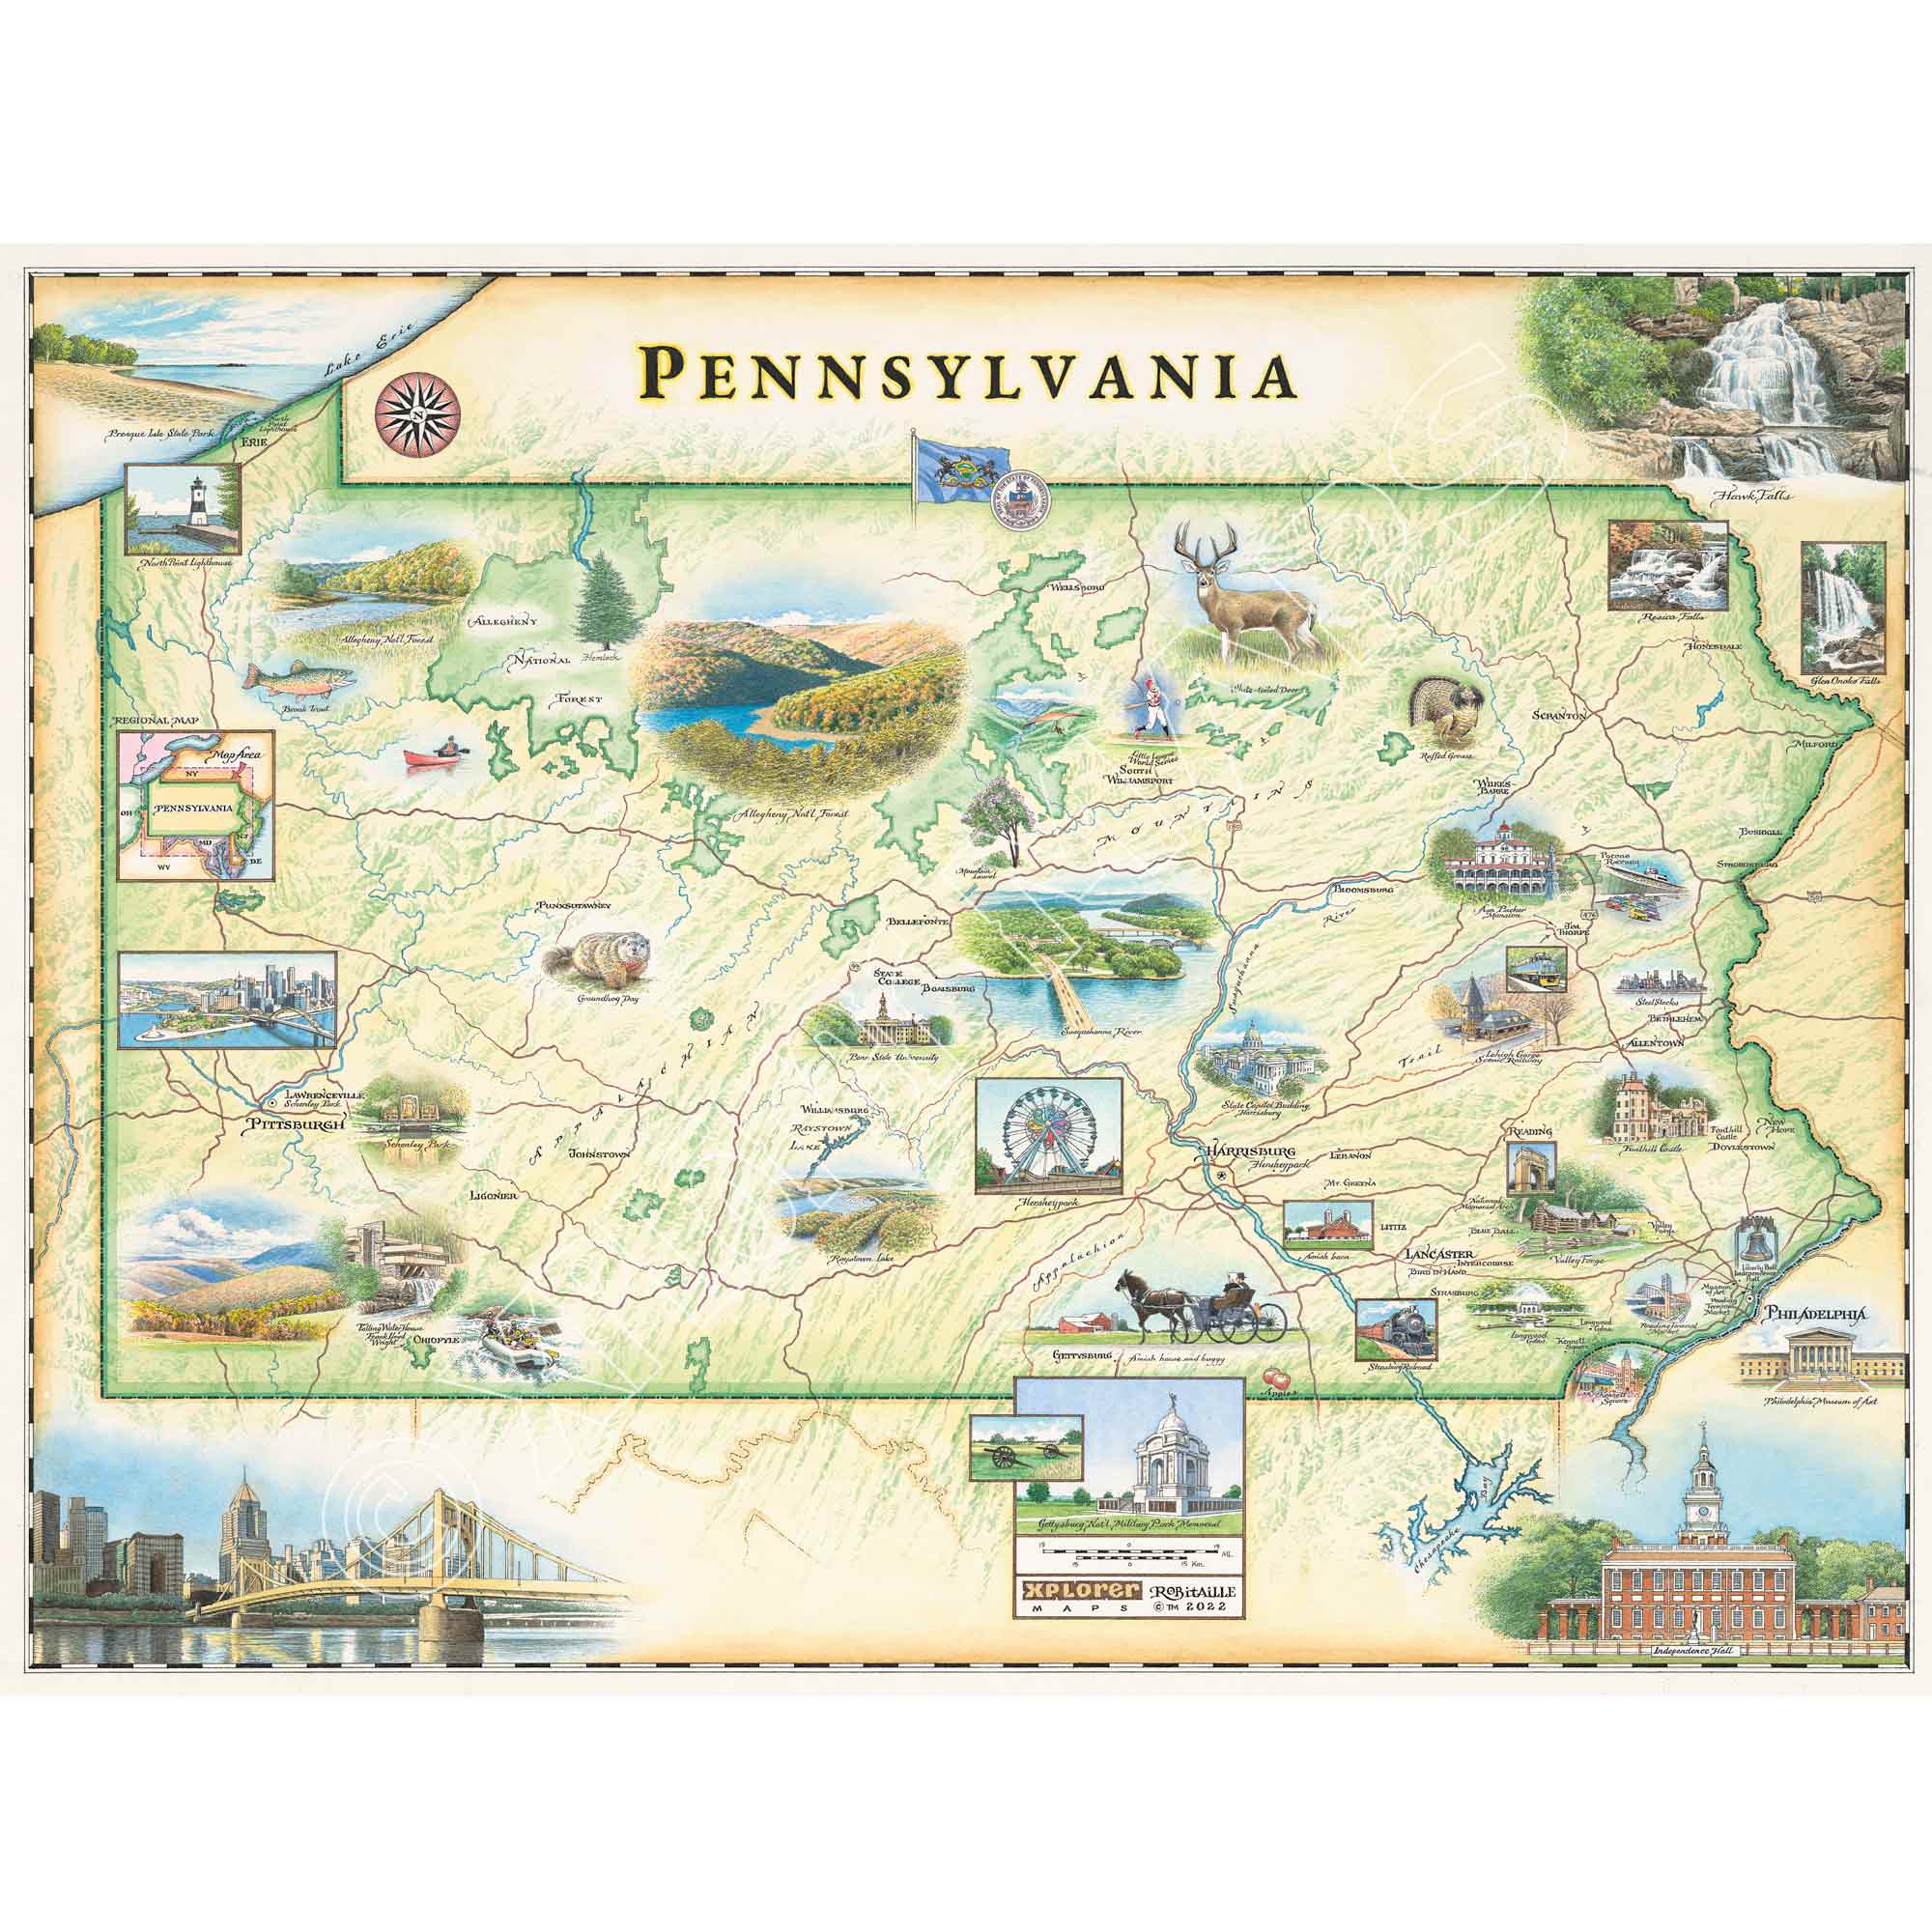 Pennsylvania state hand-drawn map in earth tones green and beige. The map features illustrations of places like Hershey park, the state capitol building, Valley Forge, Philadelphia, the Allegheny National Forest. Flora and fauna include groundhog Punxstawny Phil, Brook trout, white tail deer, and mountain laurel. Measures 24x18.